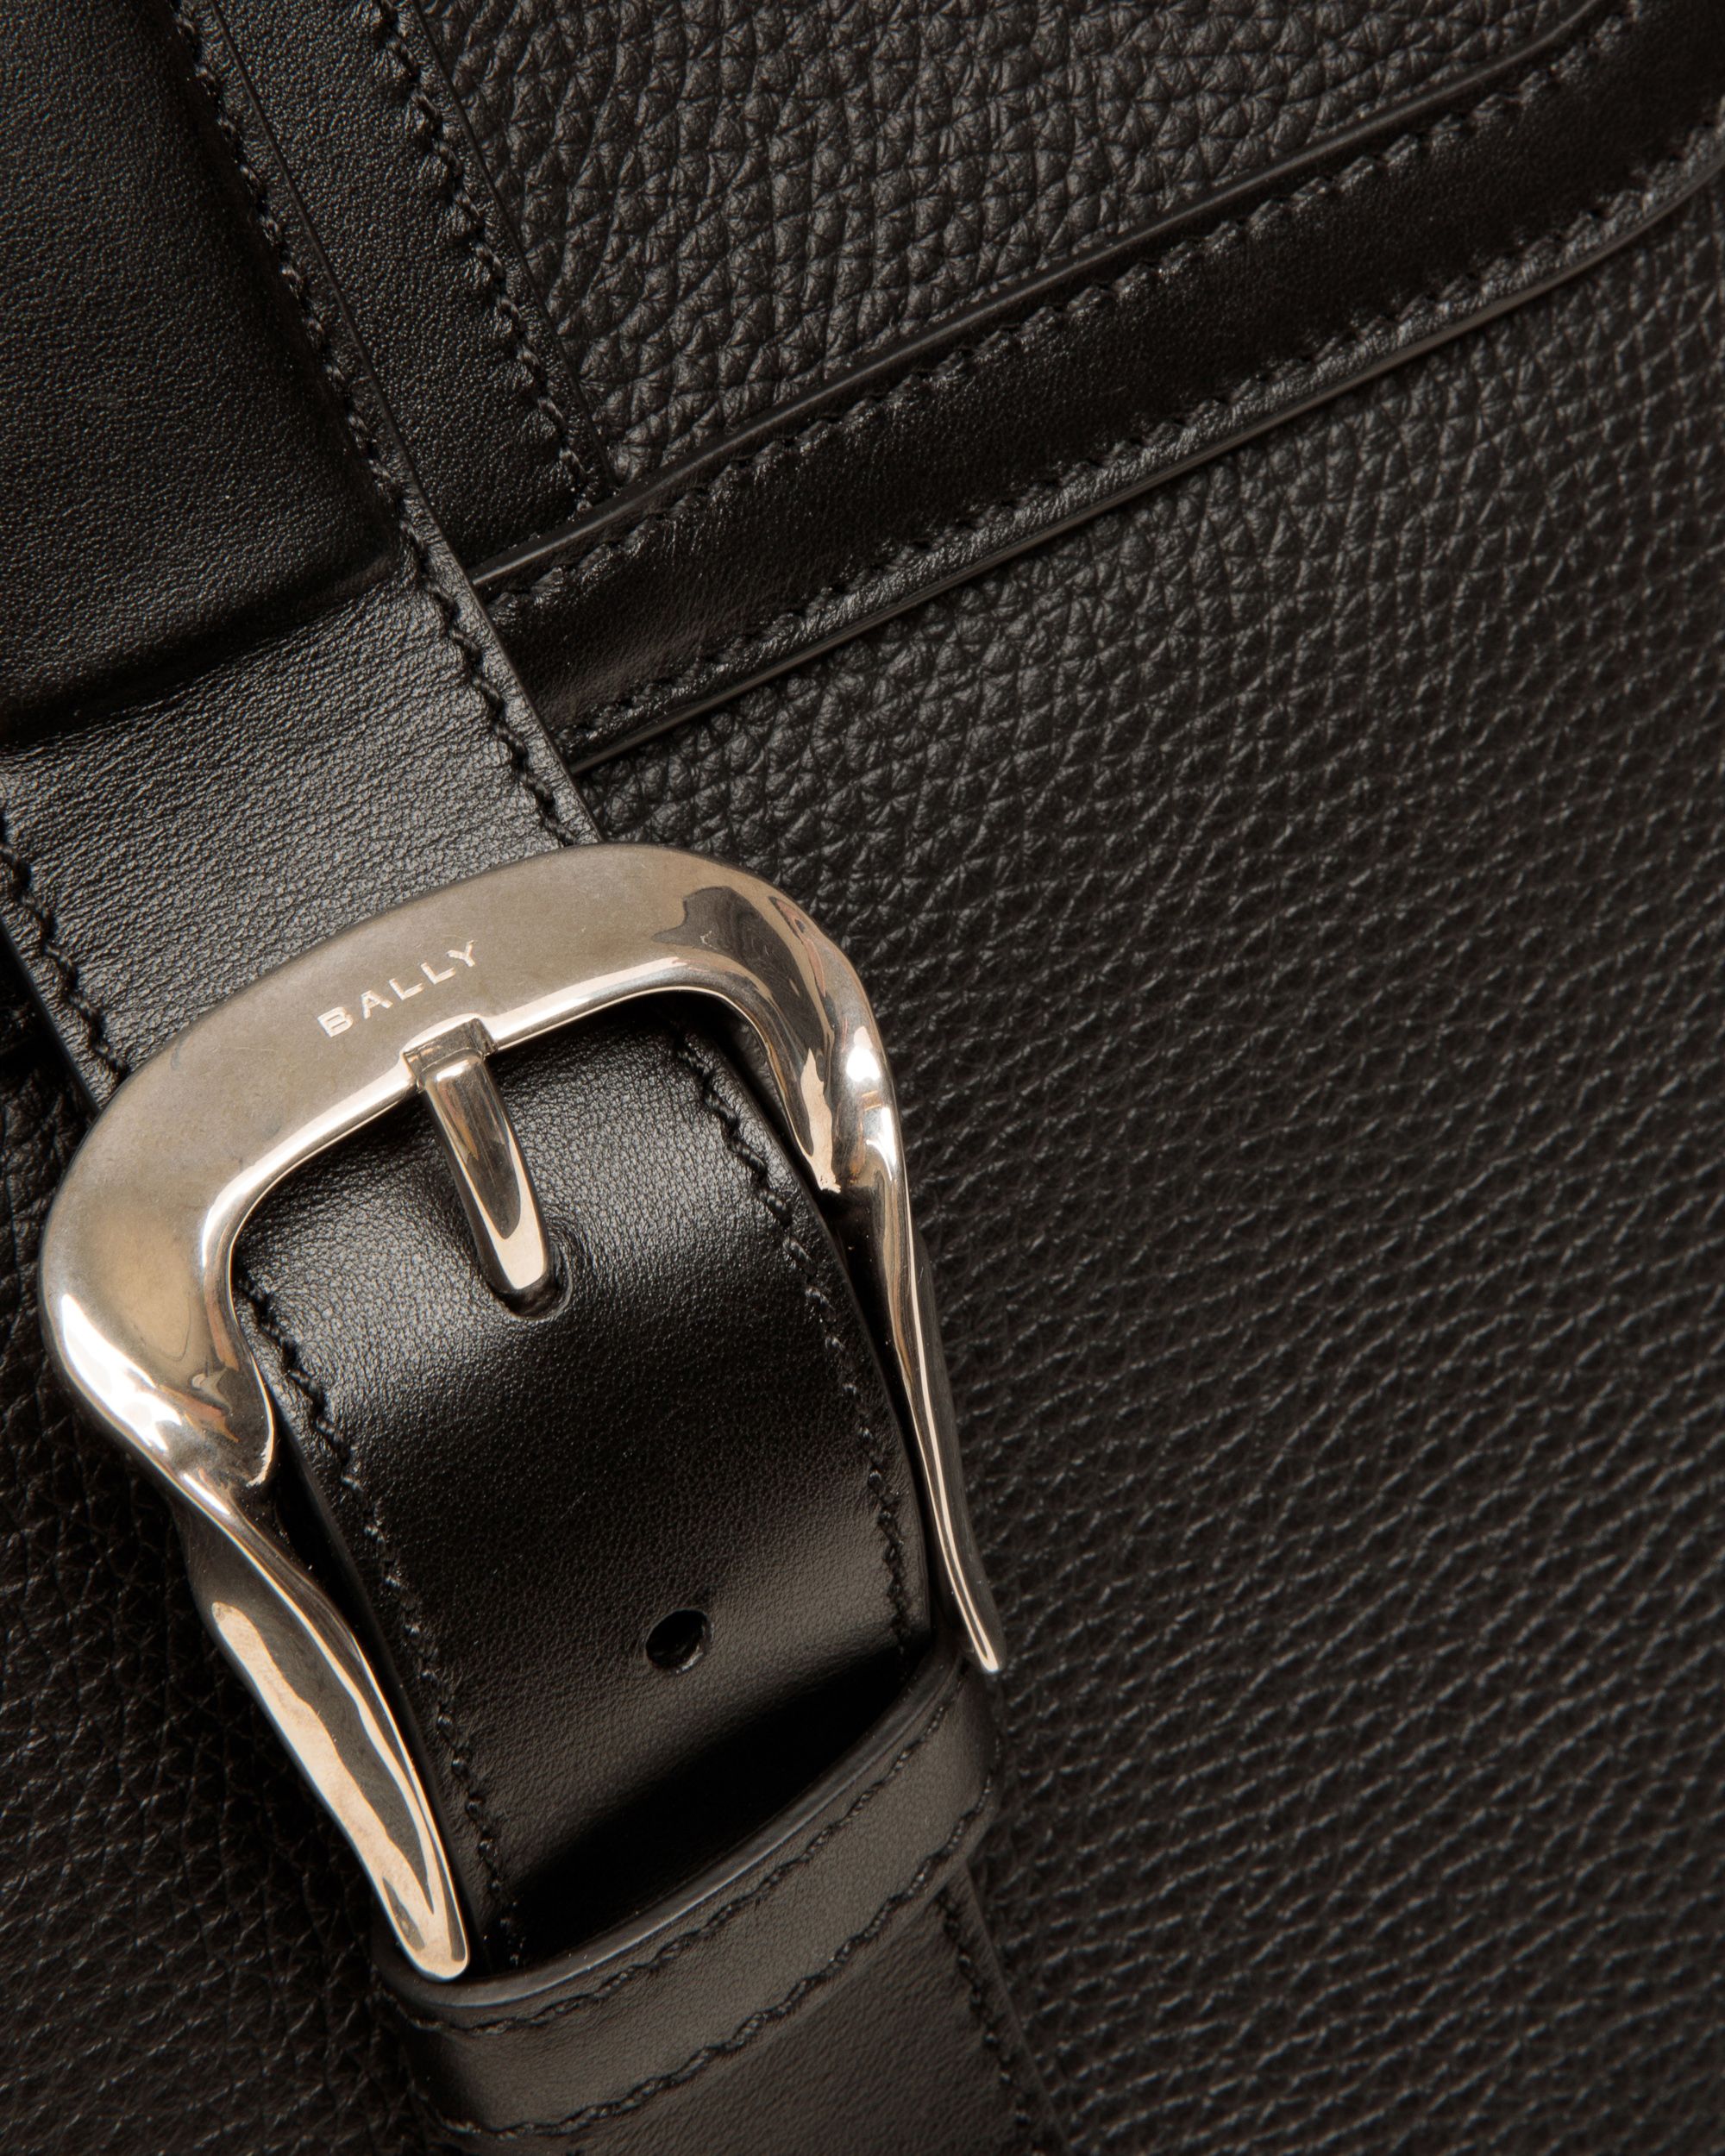 Spin | Men's Backpack in Black Grained Leather | Bally | Still Life Detail